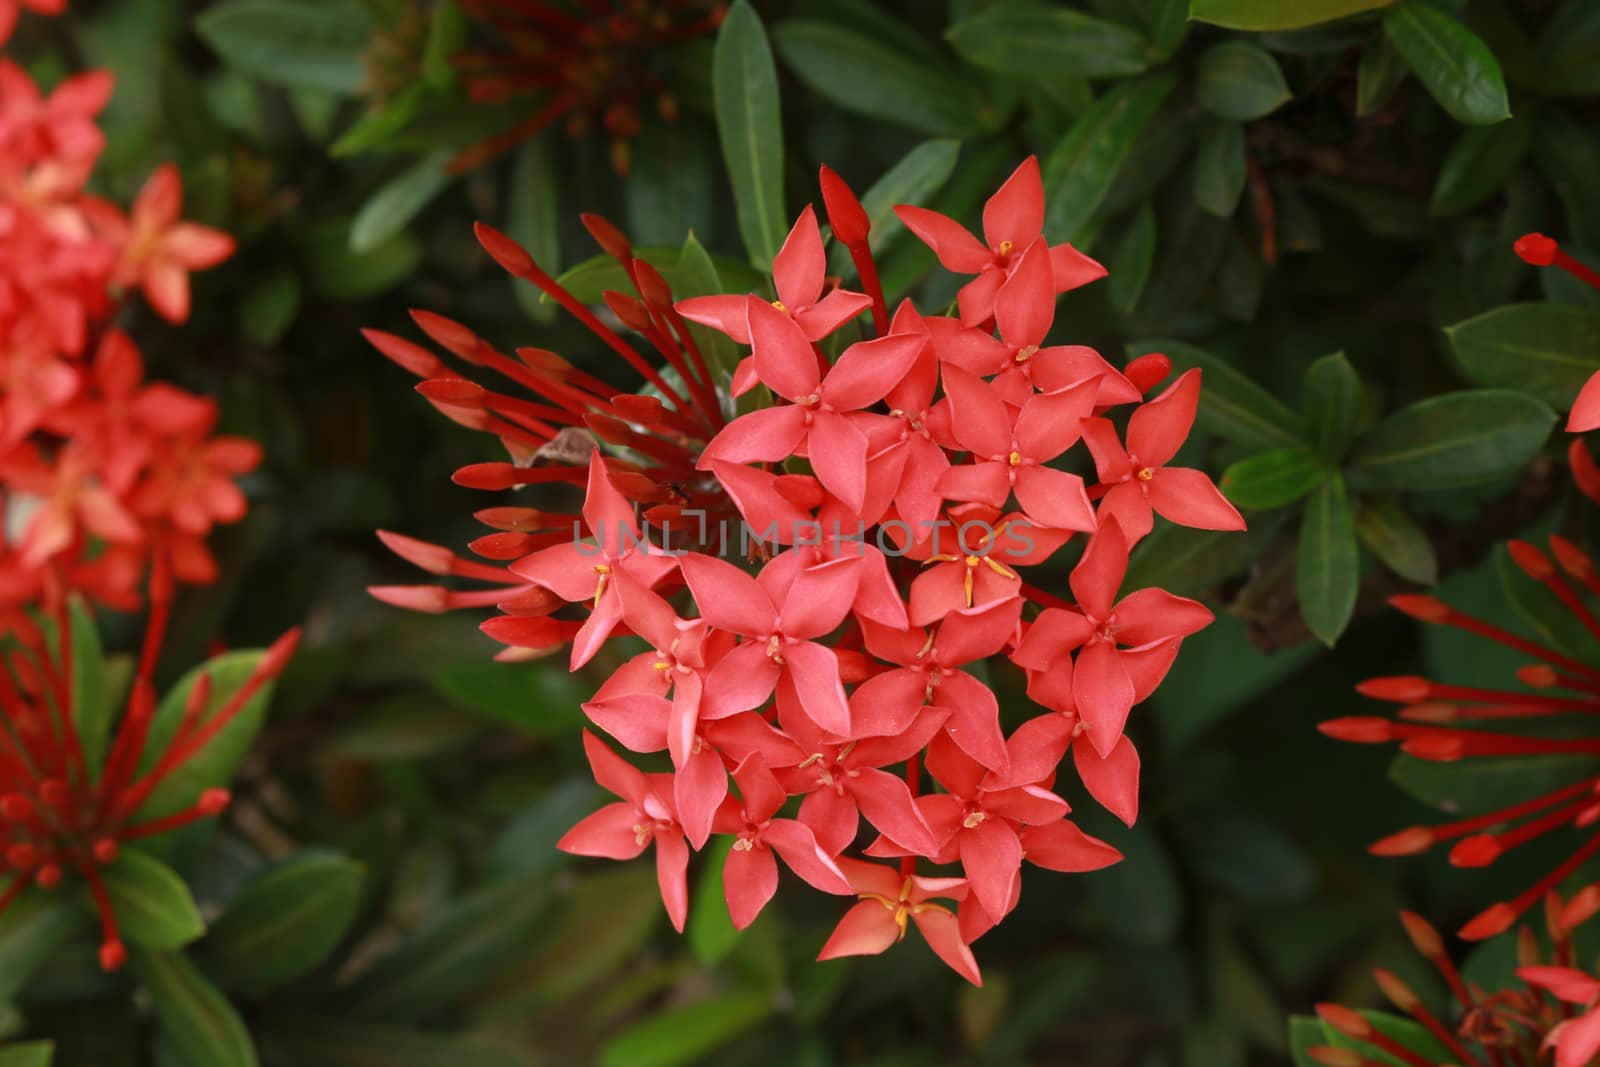 Red rubiaceae are blooming.It has many buds in one bunch.